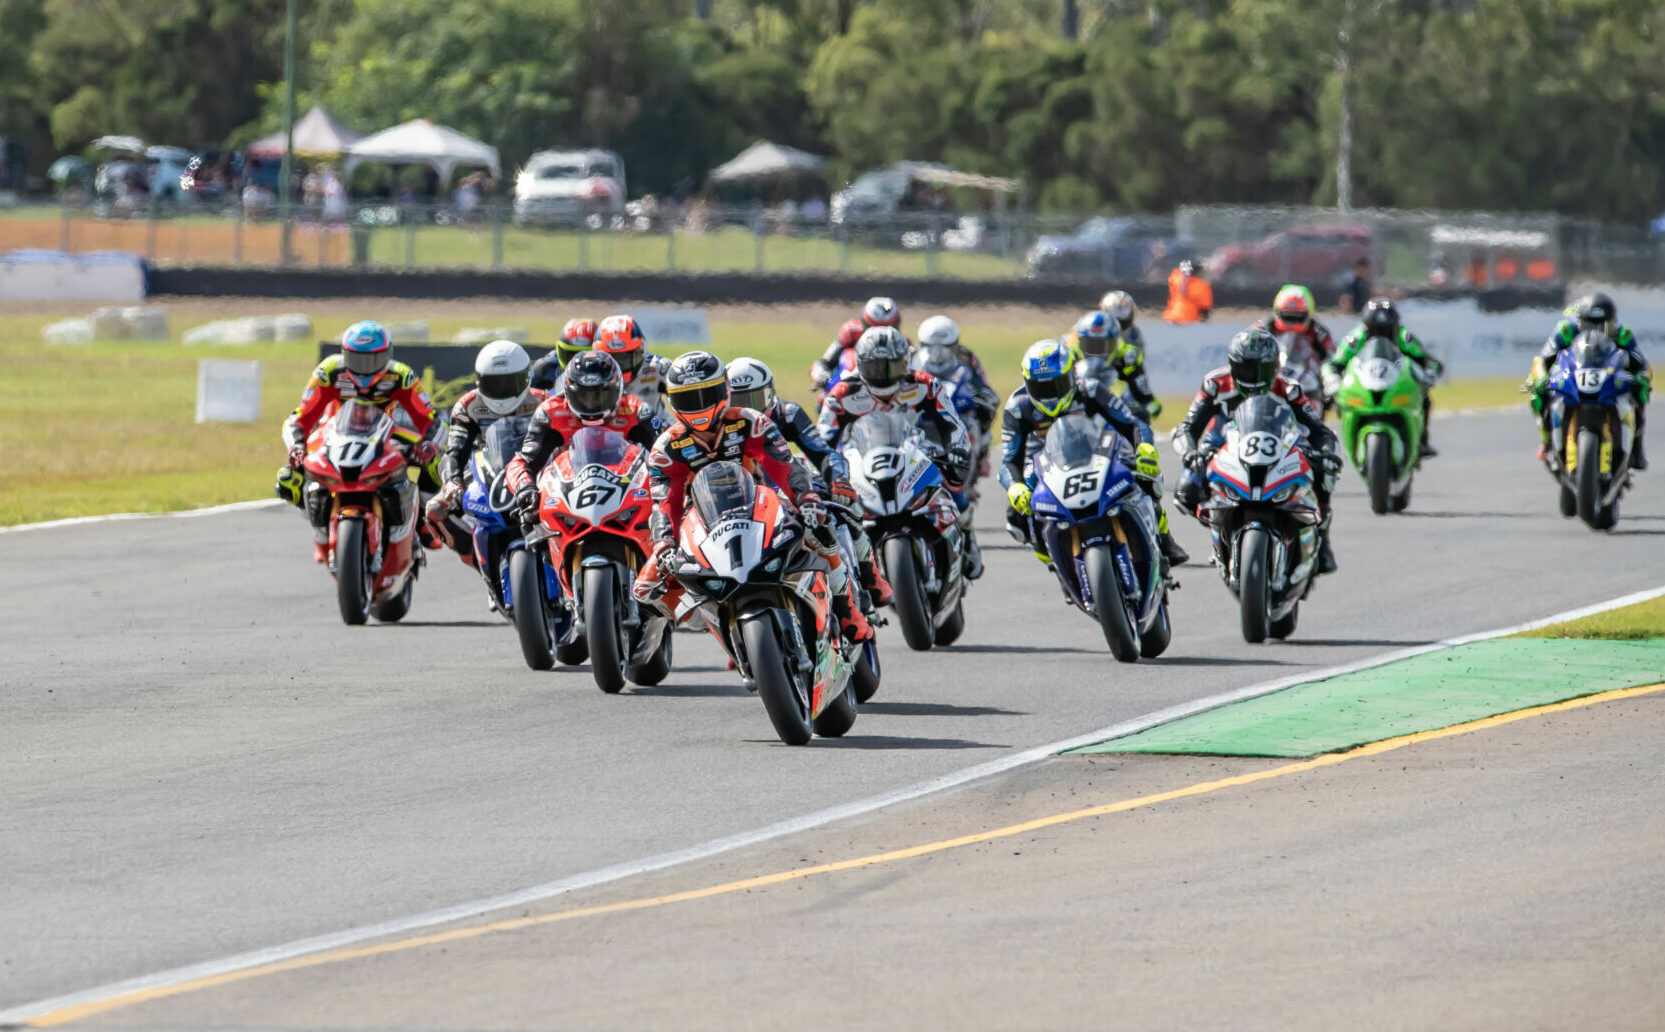 Wayne Maxwell (1) leads Mike Jones (behind Maxwell) and the rest of the field at the start of Australian Superbike Race 2 at Queensland Raceway. Photo by Karl Phillipson/@optikalphoto, courtesy ASBK.